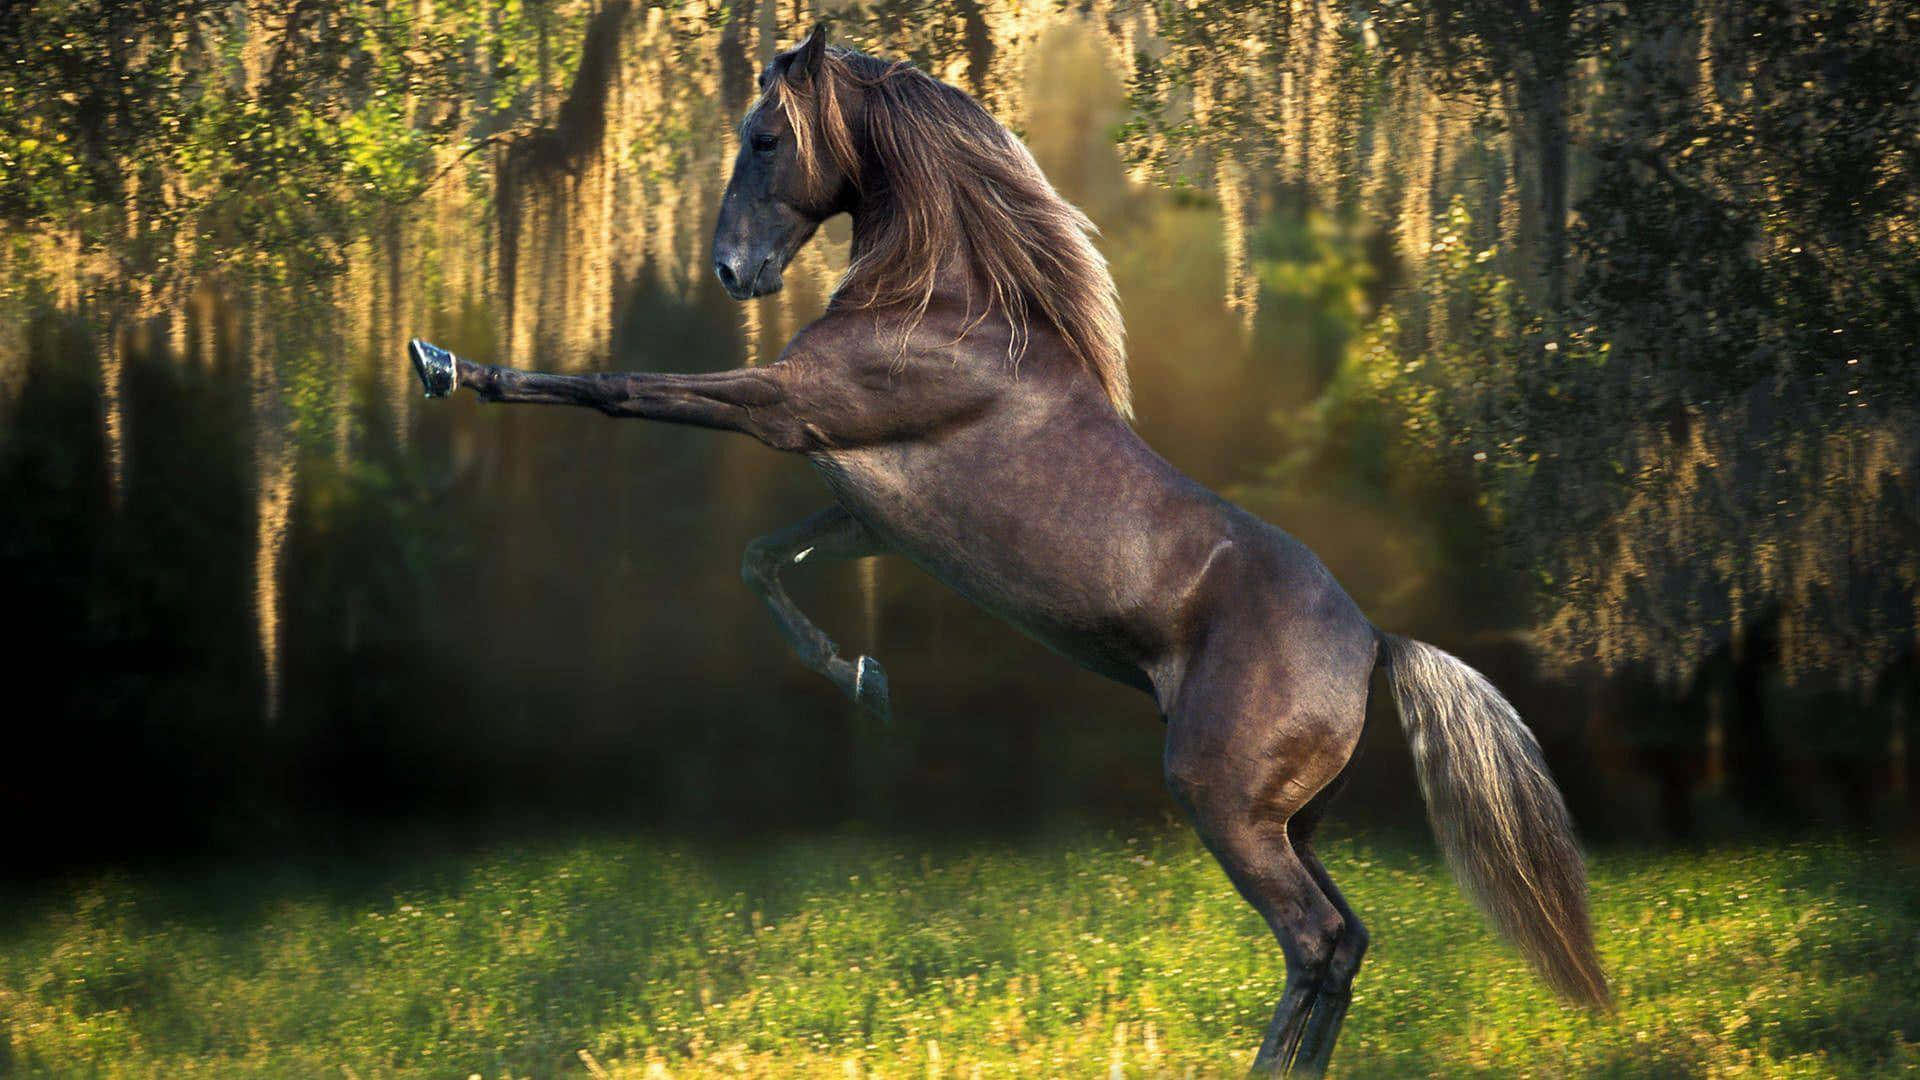 Check Out This Cool Horse! Wallpaper